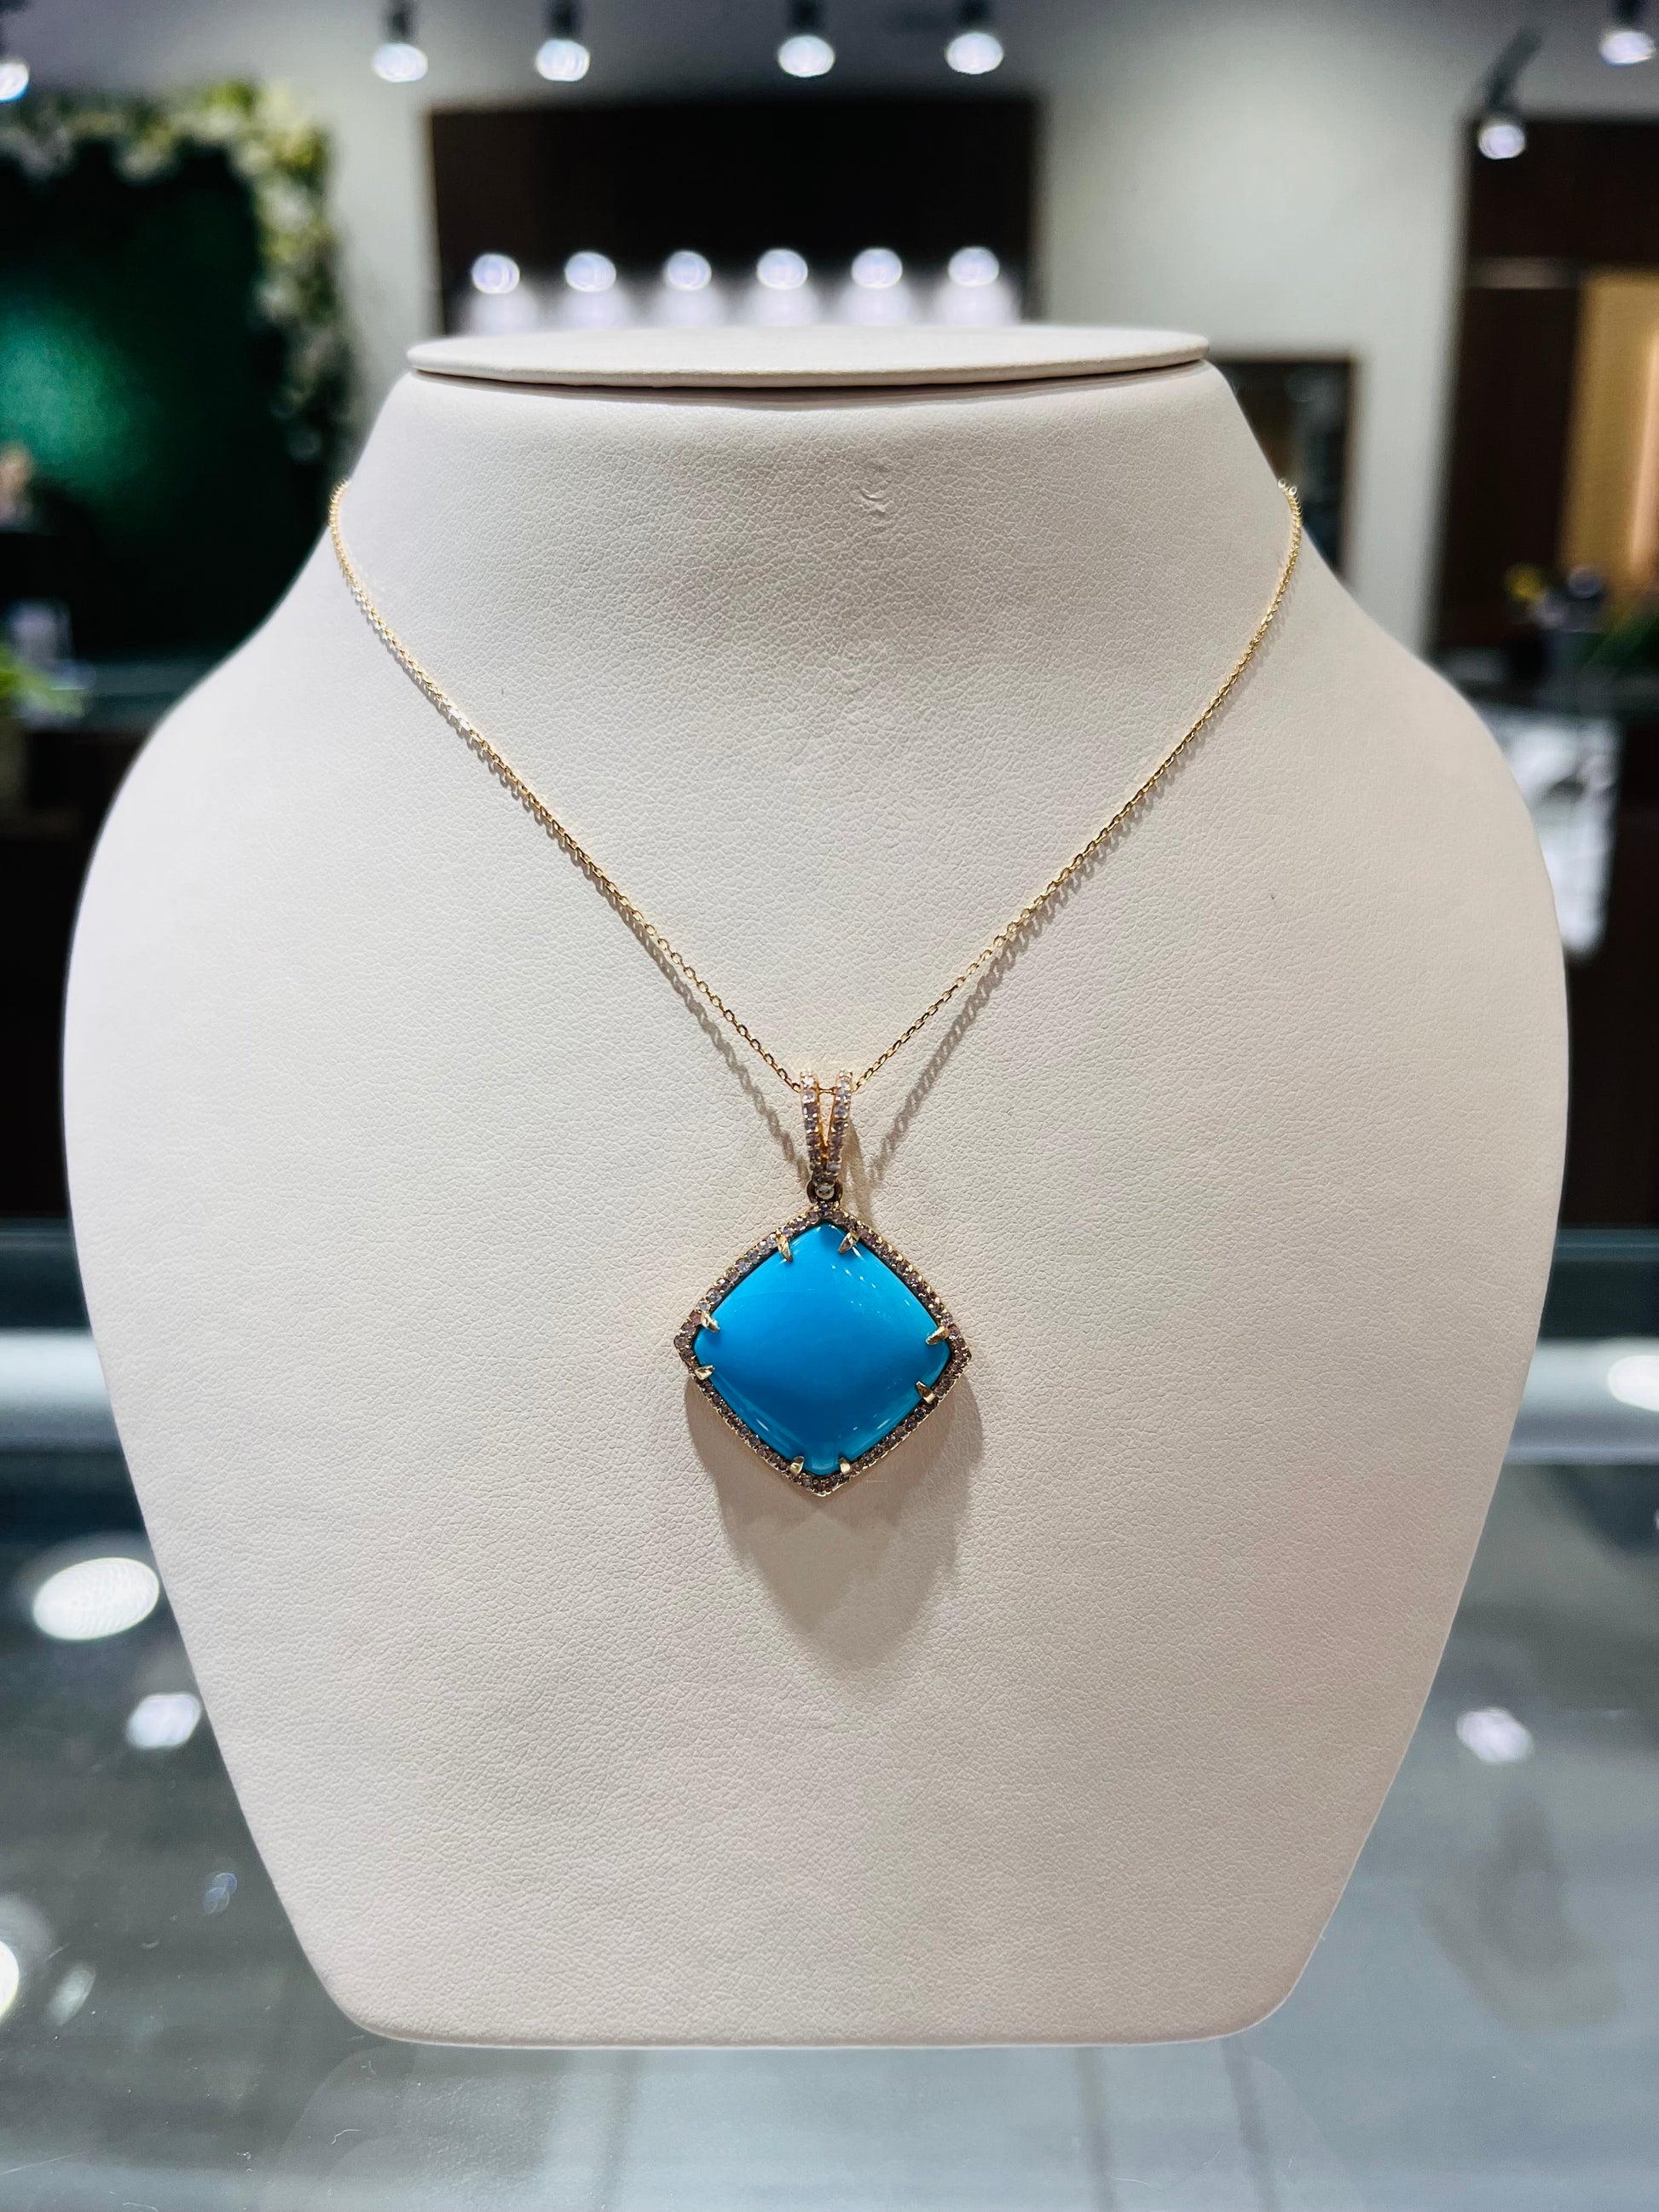 13.06 Carat Natural Turquoise Necklace - The Village Jeweler